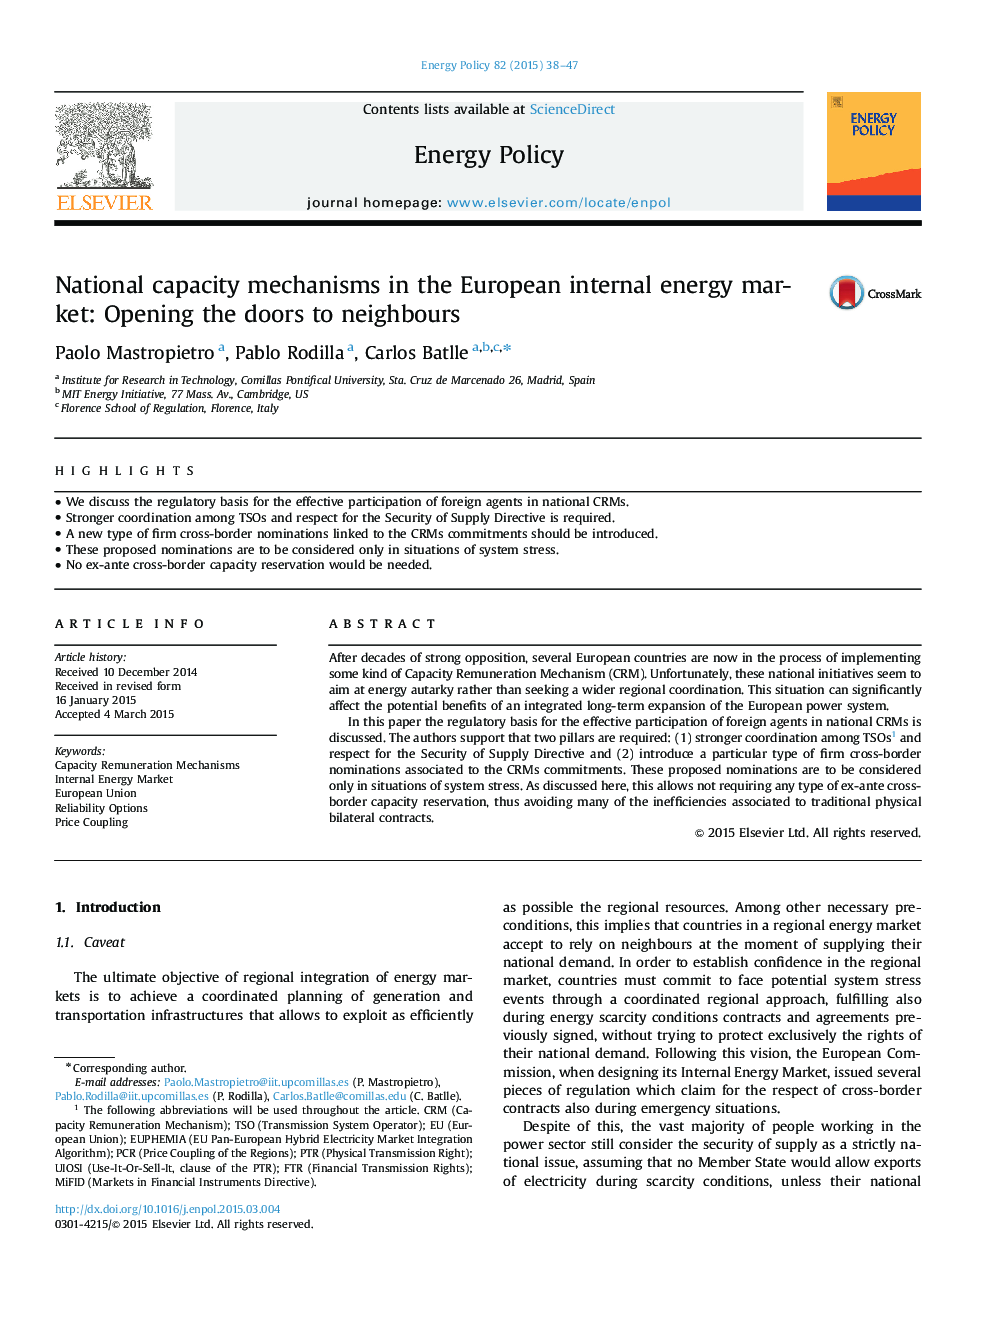 National capacity mechanisms in the European internal energy market: Opening the doors to neighbours